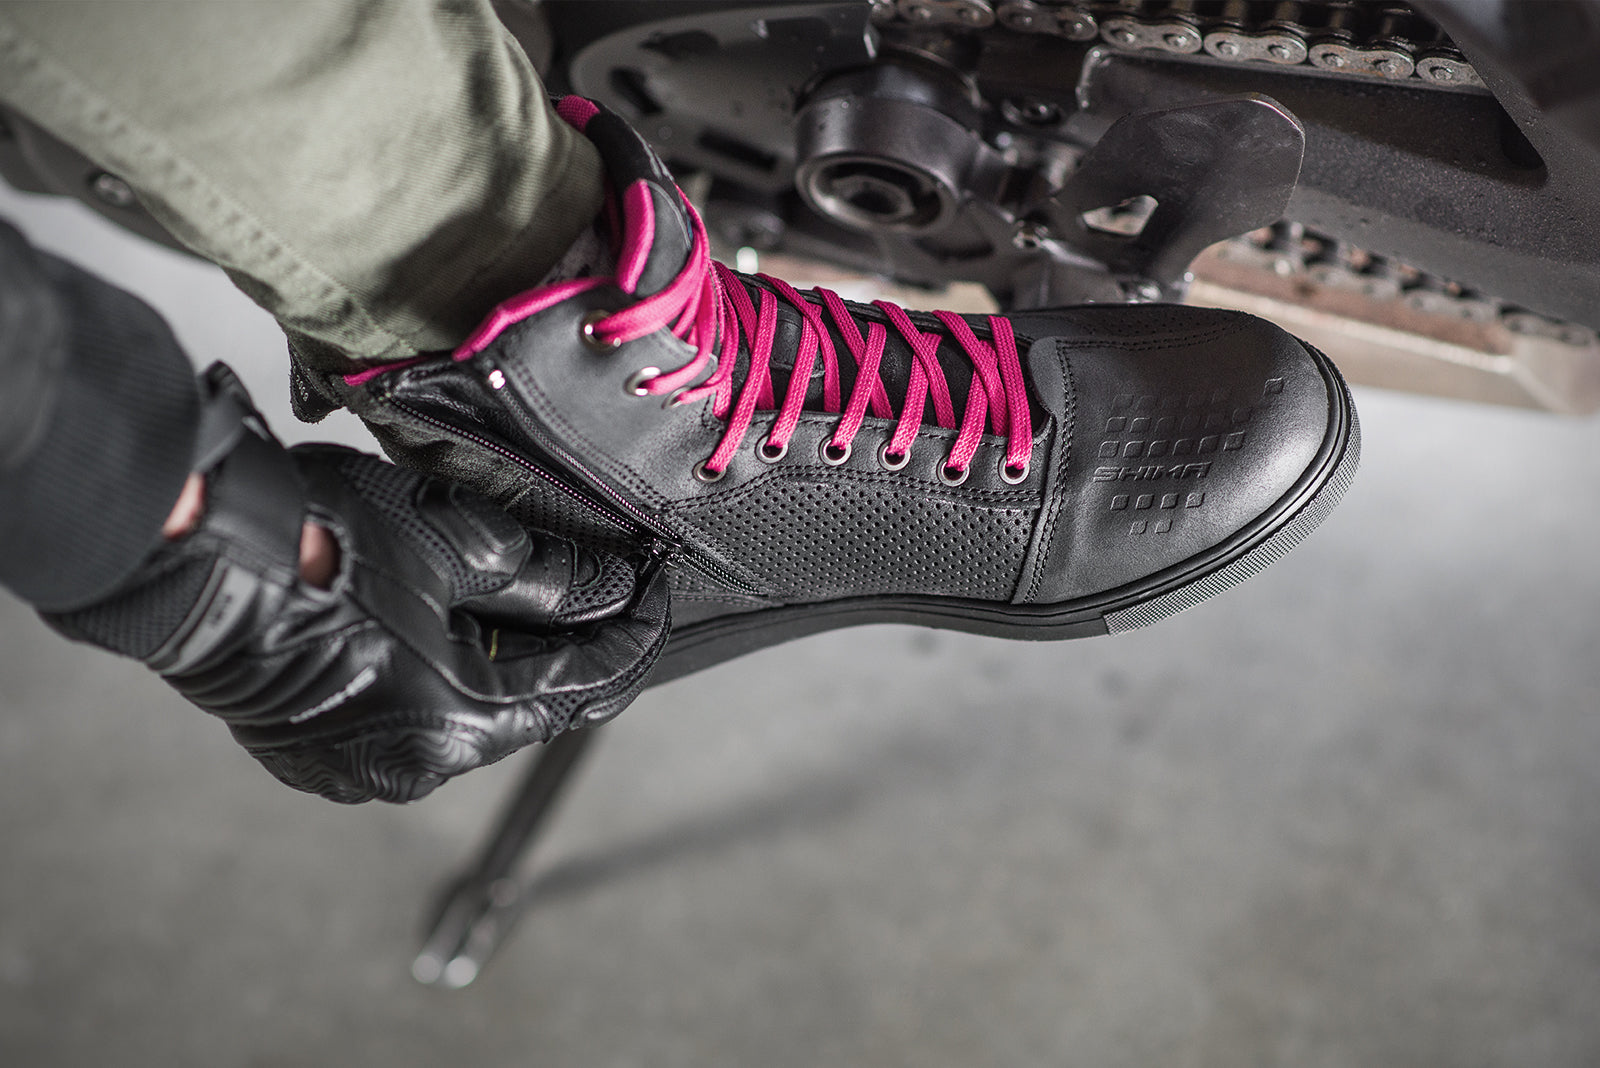 Rebel waterproof motorcycle sneakers with pink laces from Shima being zipped